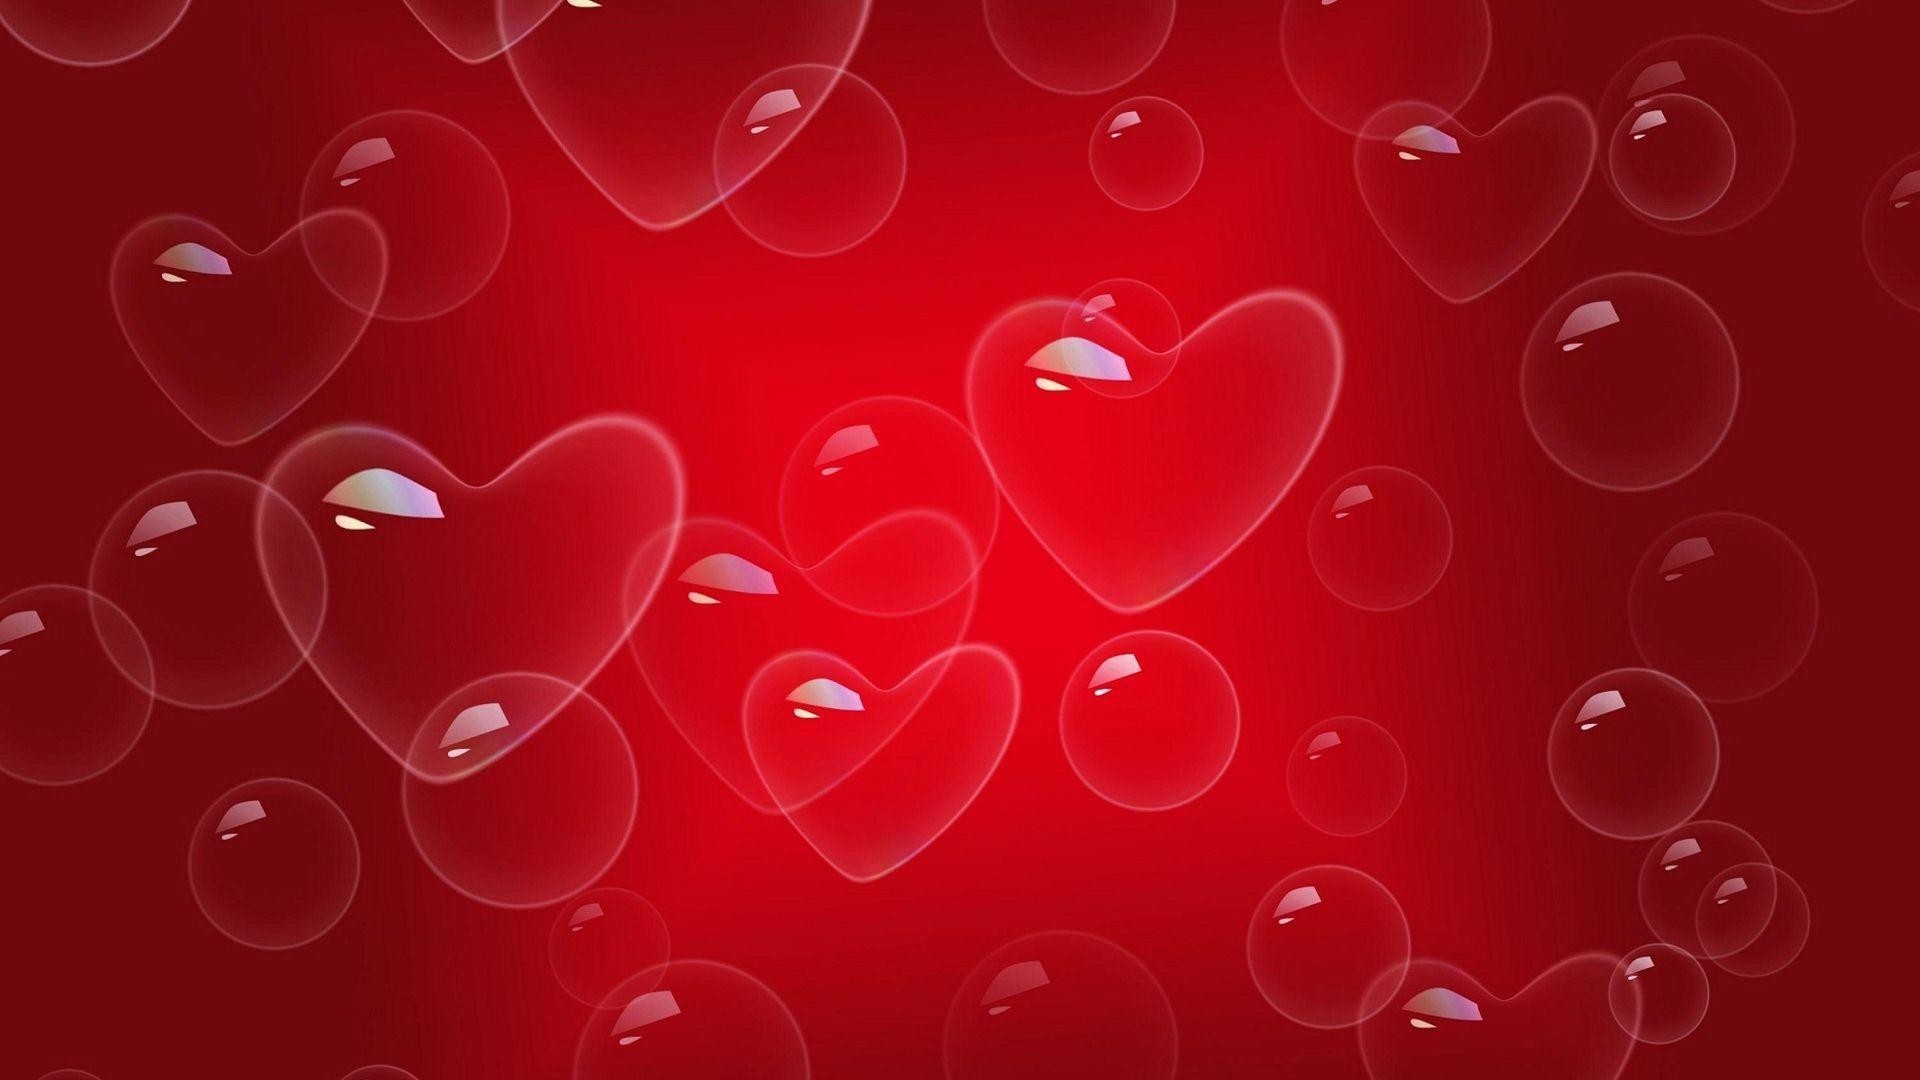 1920x1080  Love Heart Bubbles Red Background Images | HD Wallpapers Images